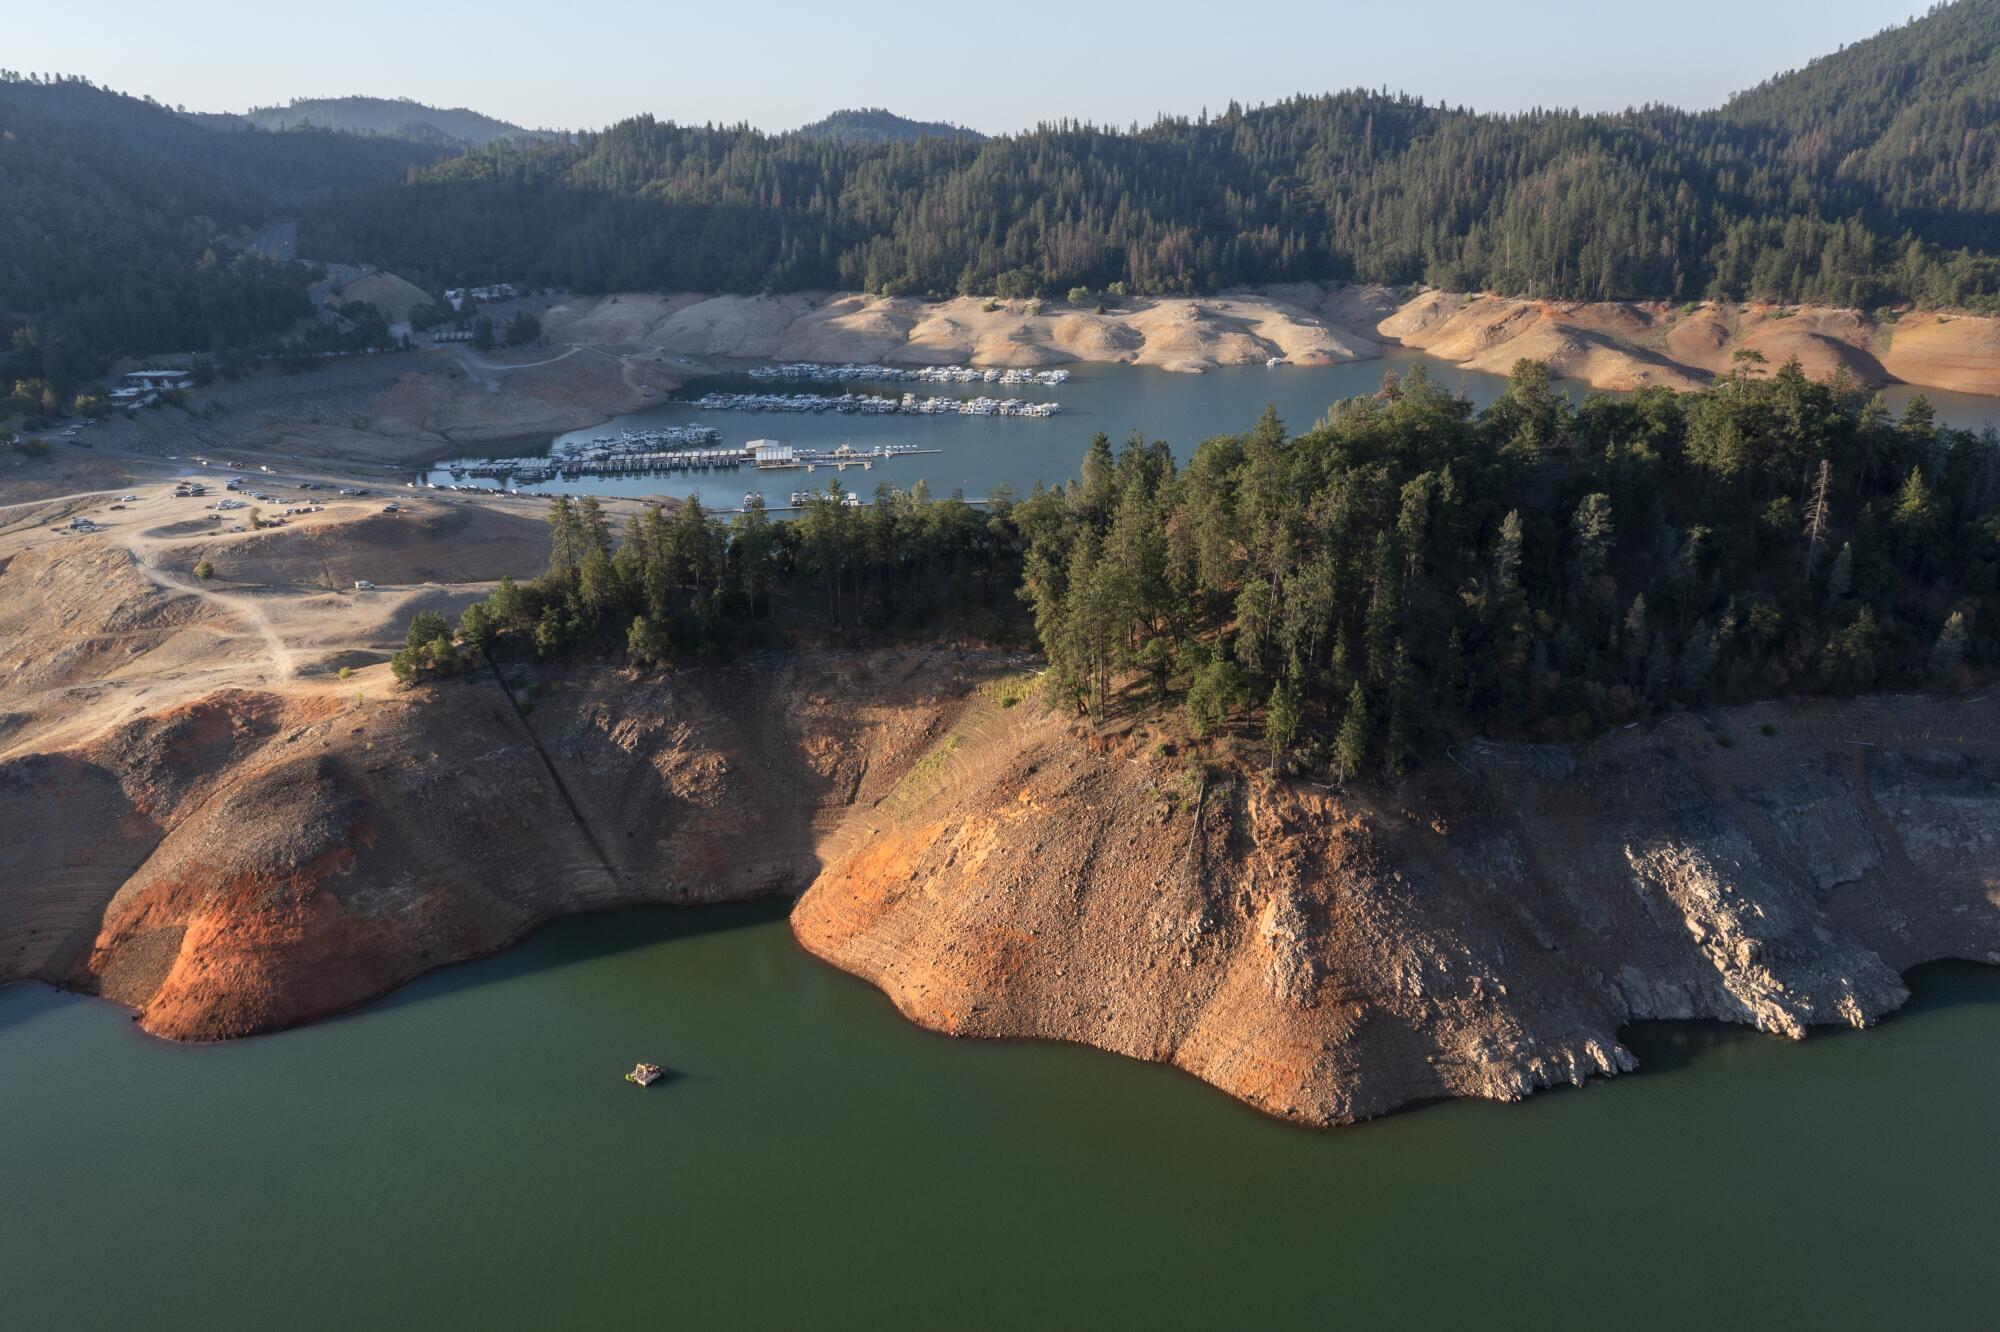 Lake Shasta, the state’s largest surface water reservoir, was at 50% of capacity in March. It's at 38% now.